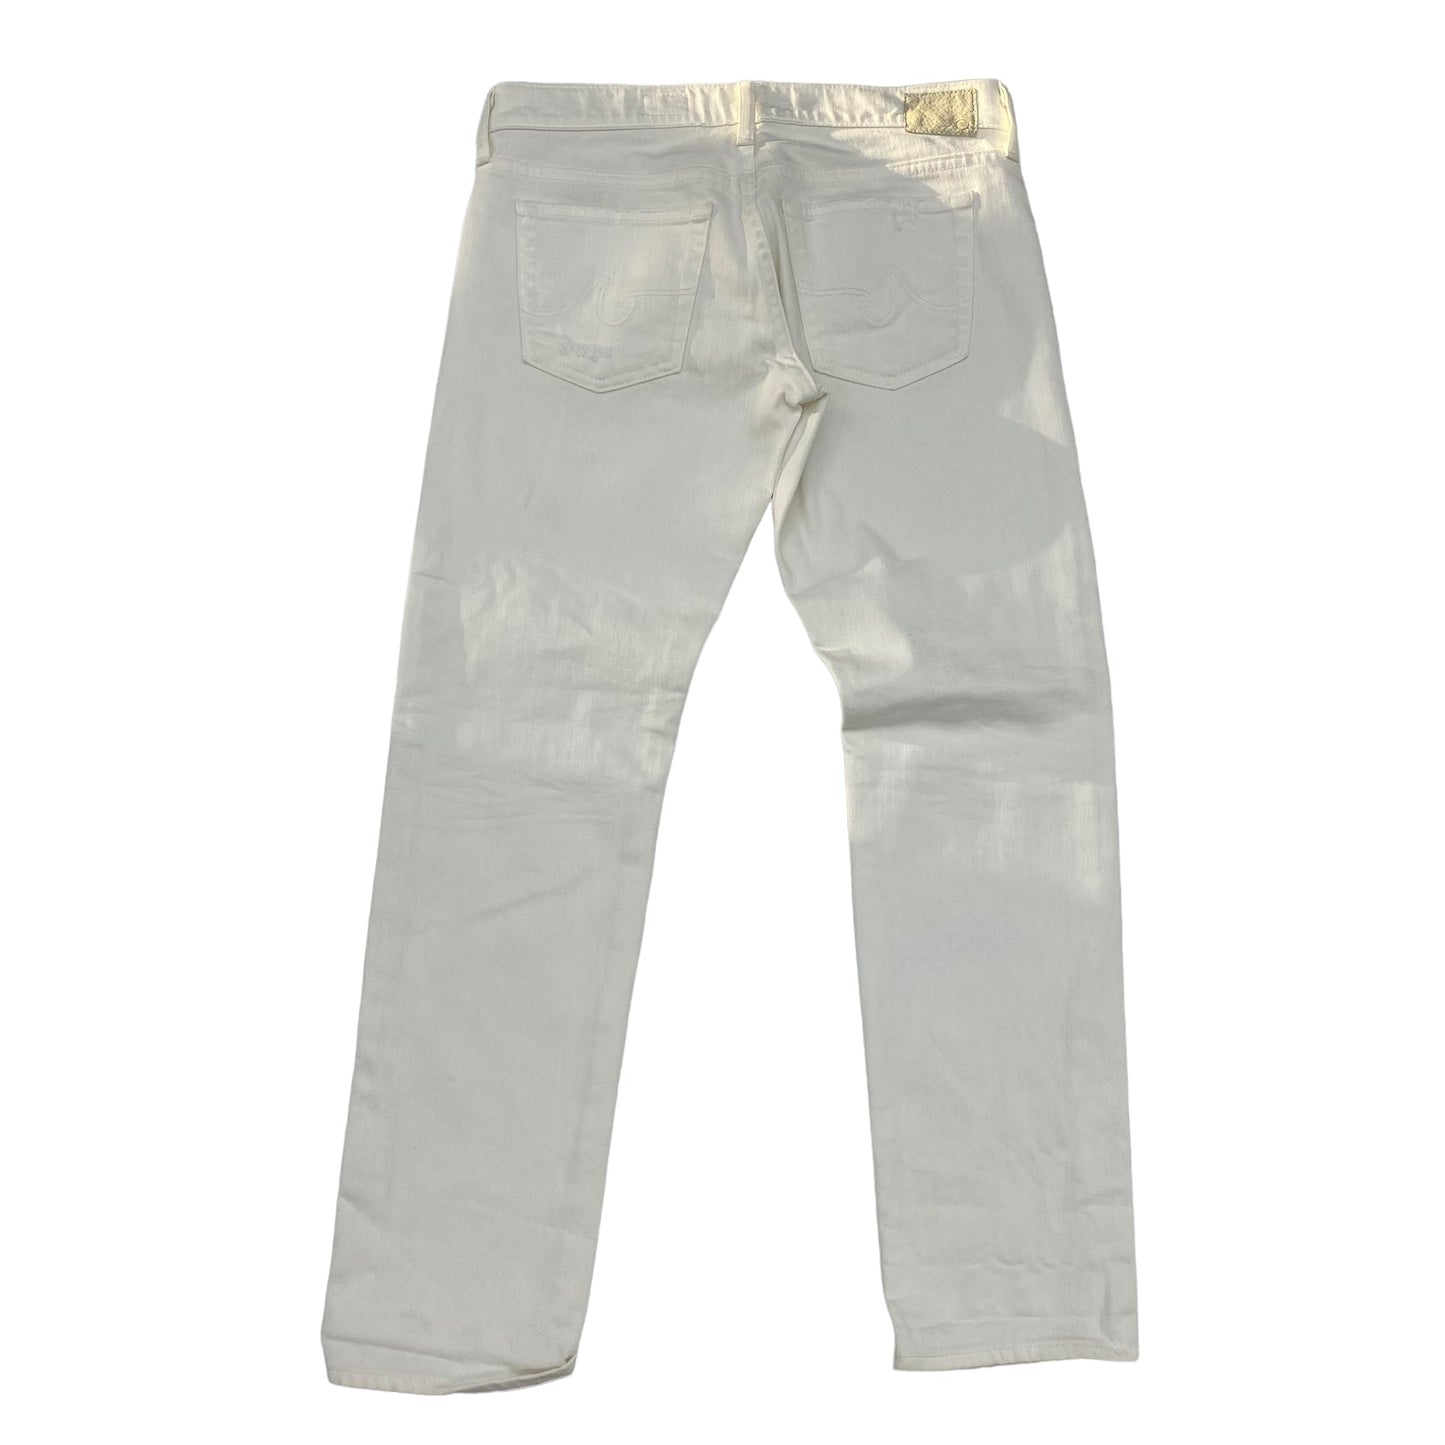 Jeans Cropped By Adriano Goldschmied  Size: 4